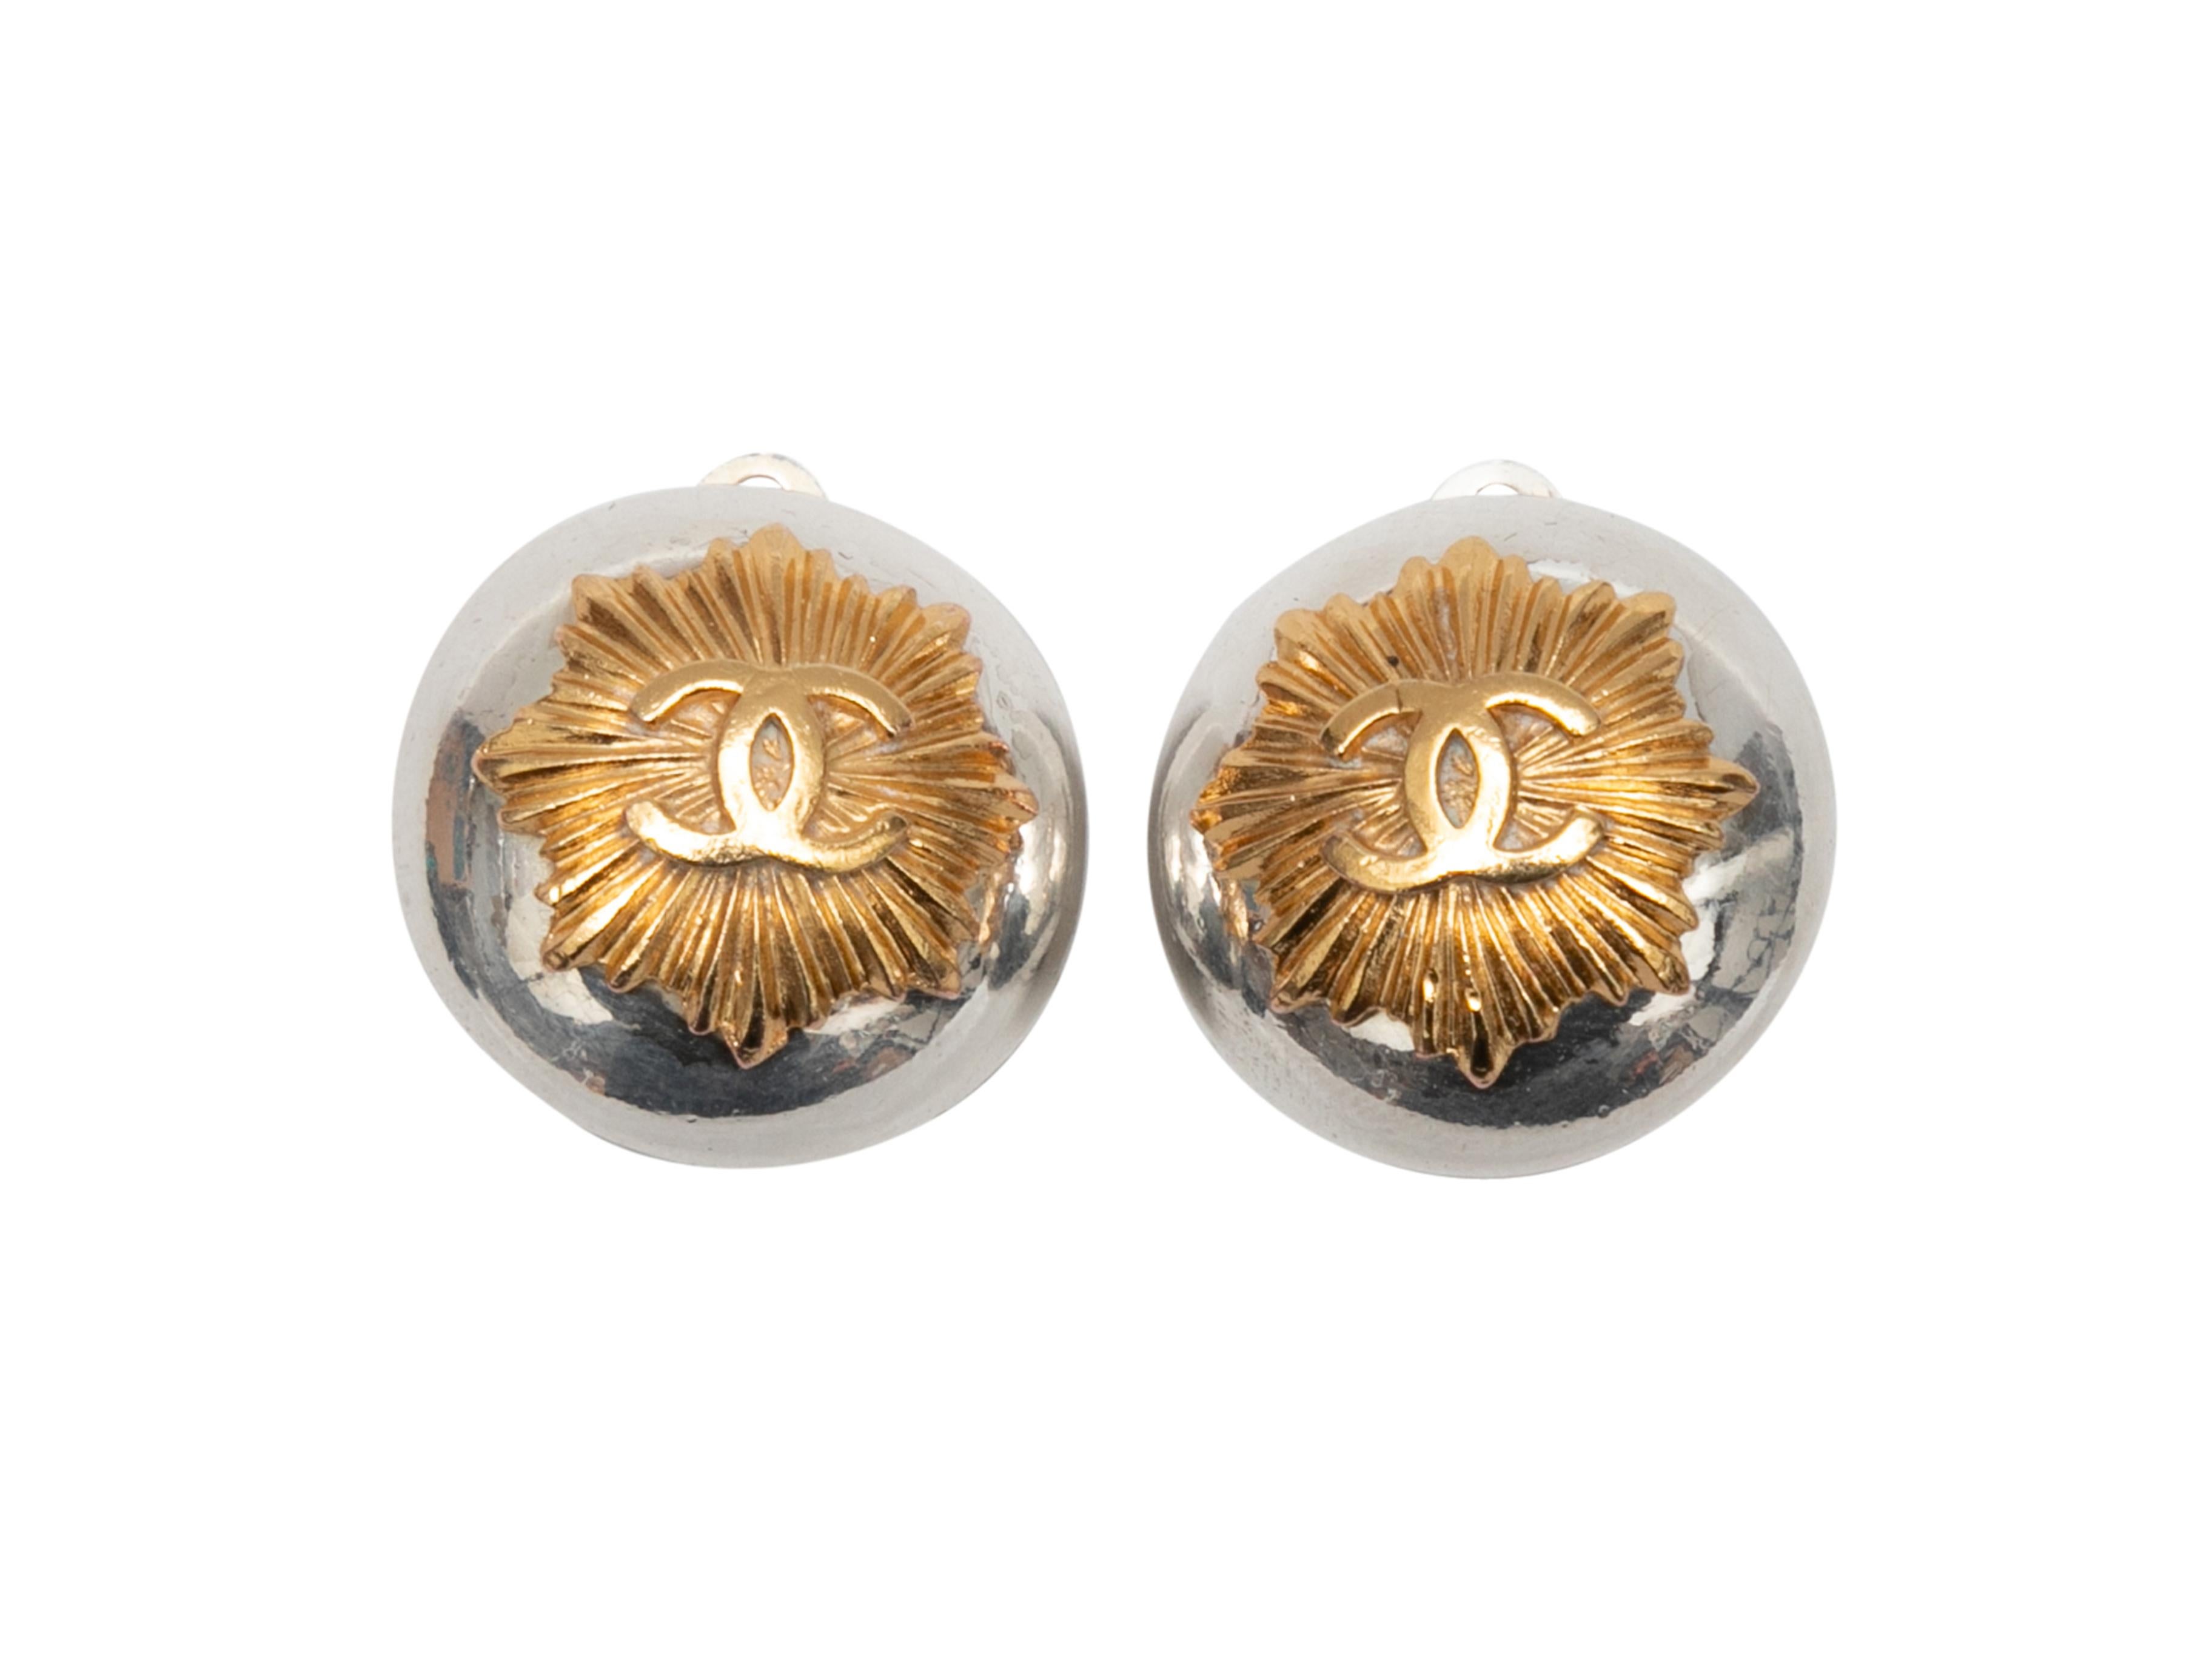 Vintage Silver-Tone & Gold-Tone Chanel Spring 1997 Logo Clip-On Earrings In Good Condition For Sale In New York, NY